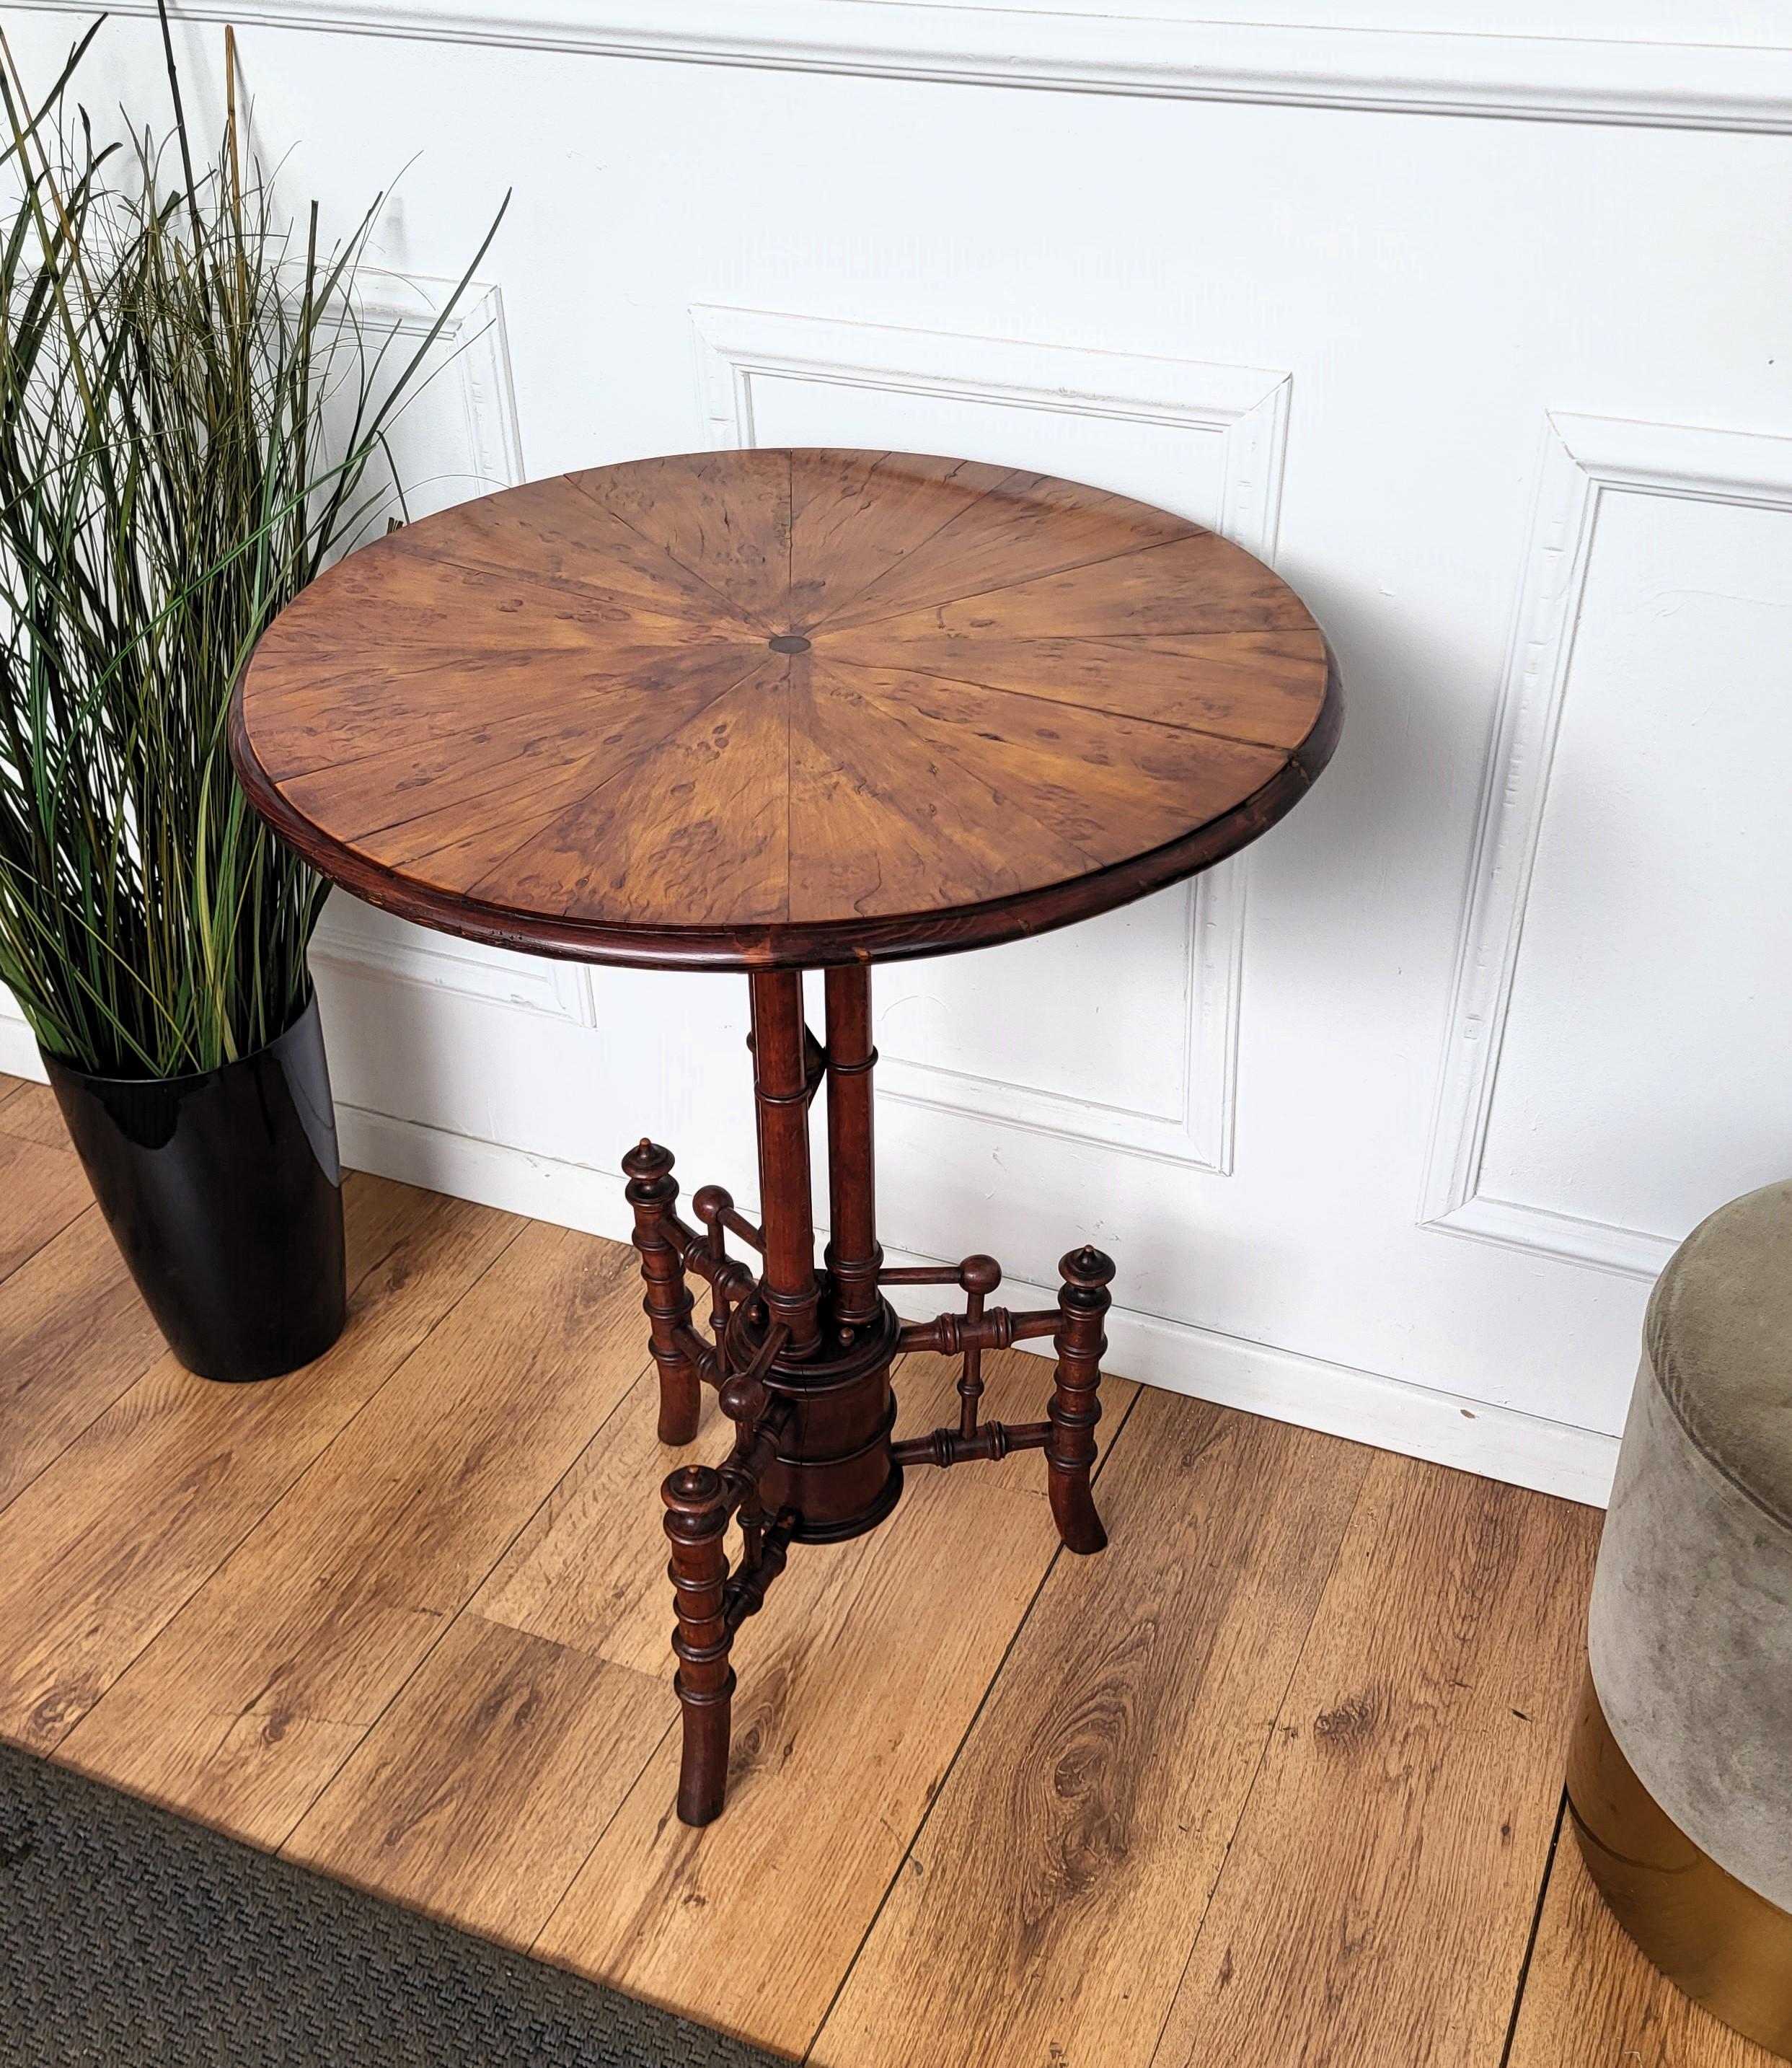 Beautiful antique Italian solid walnut side table features a round beveled top with veneer wood burl decor standing on the central beautifully carved tripod legs. This Italian walnut side or coffee table with the rich and beautiful patina would look